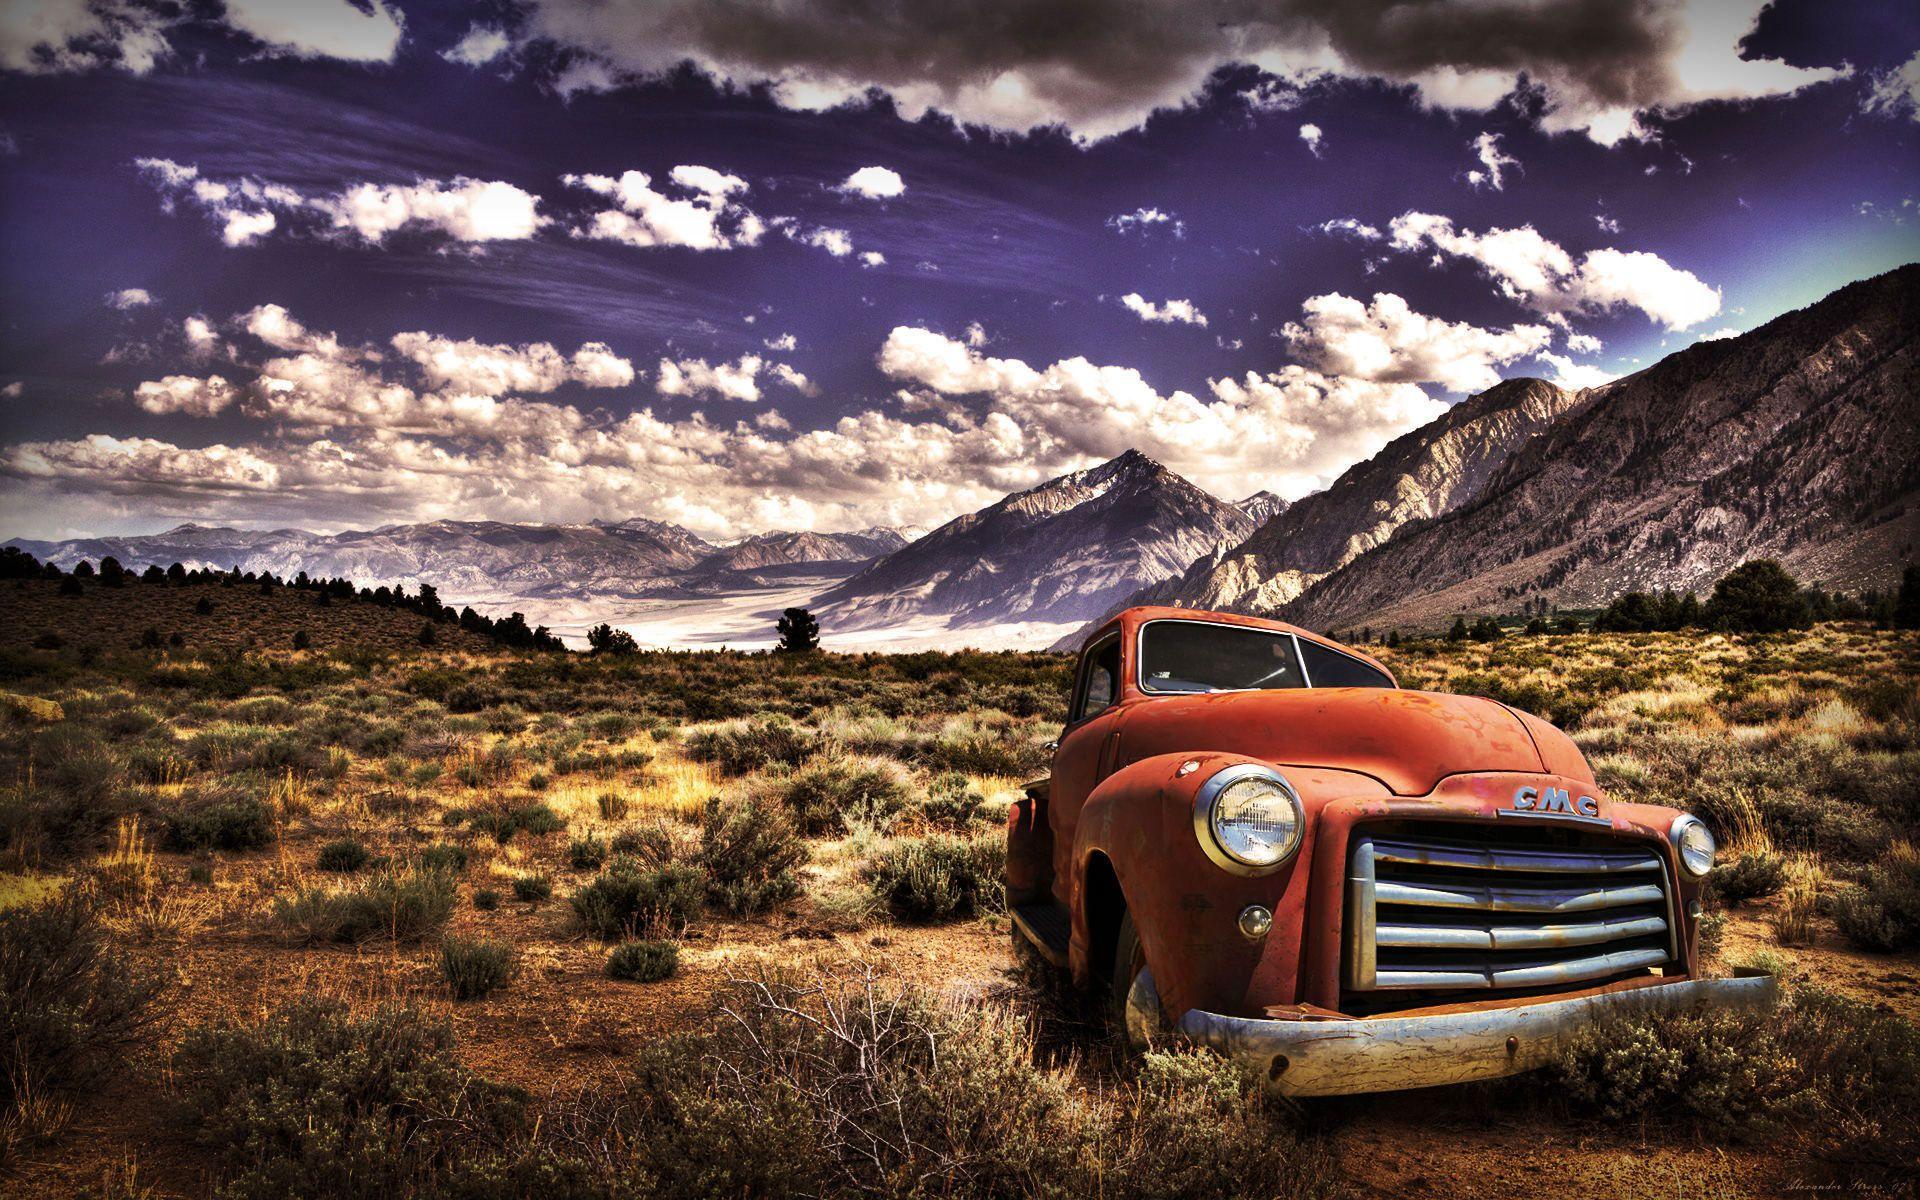 Download Old Chevy Truck Wallpaper Gallery